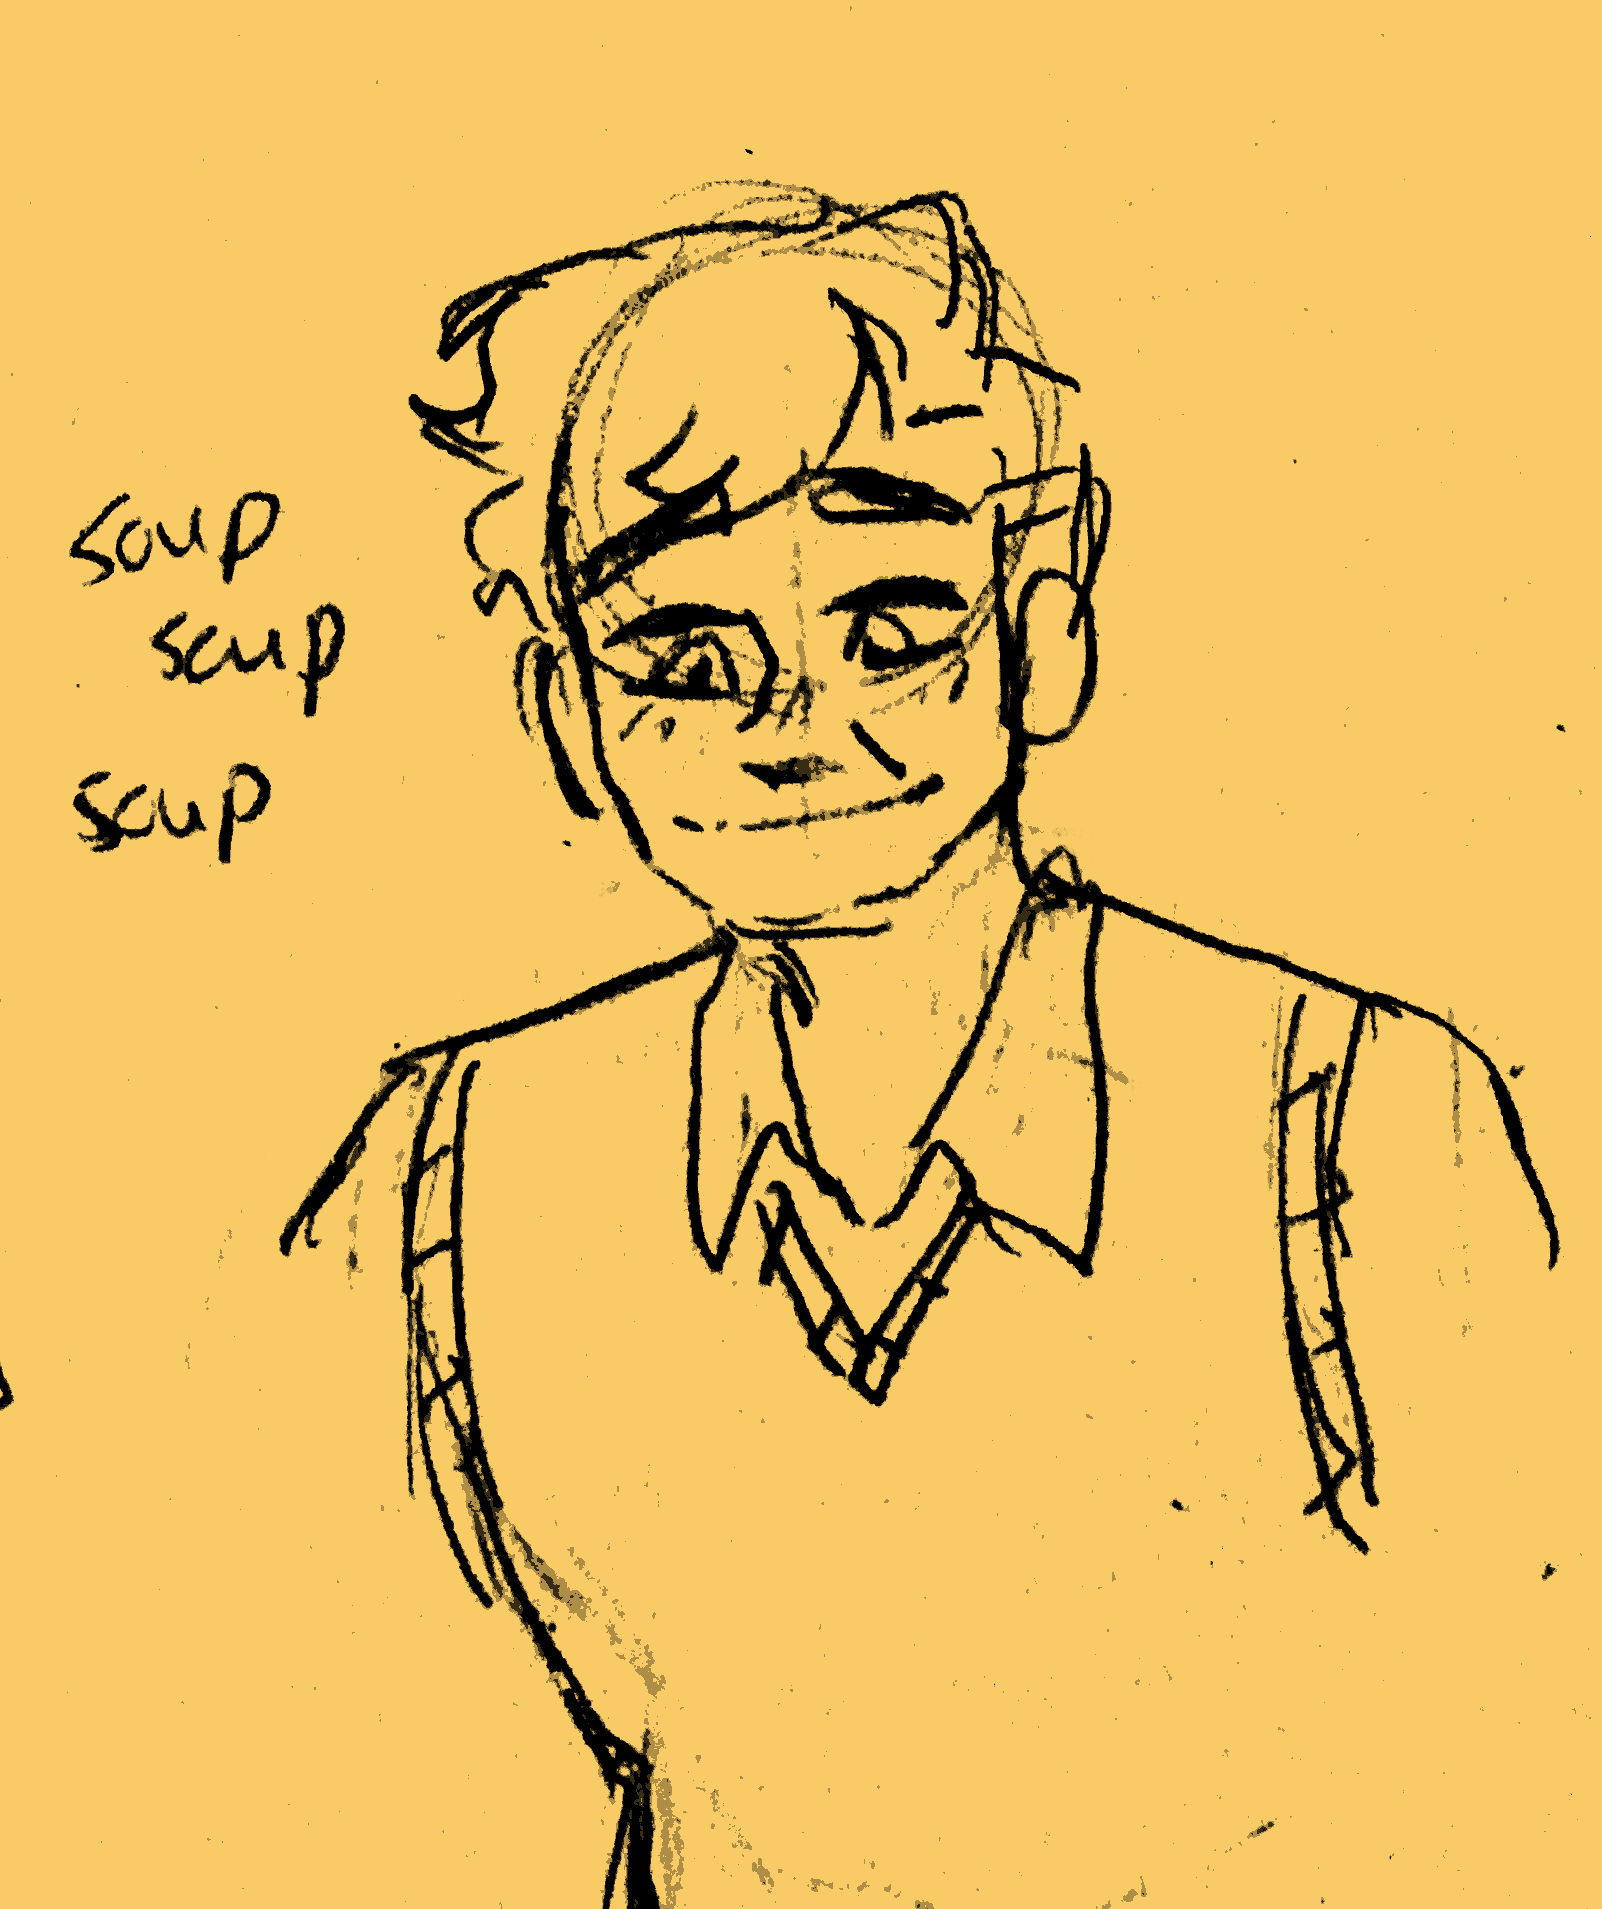 ID: a drawing of Henry smiling and looking down at something with 'soup soup soup' written next to his head /End ID